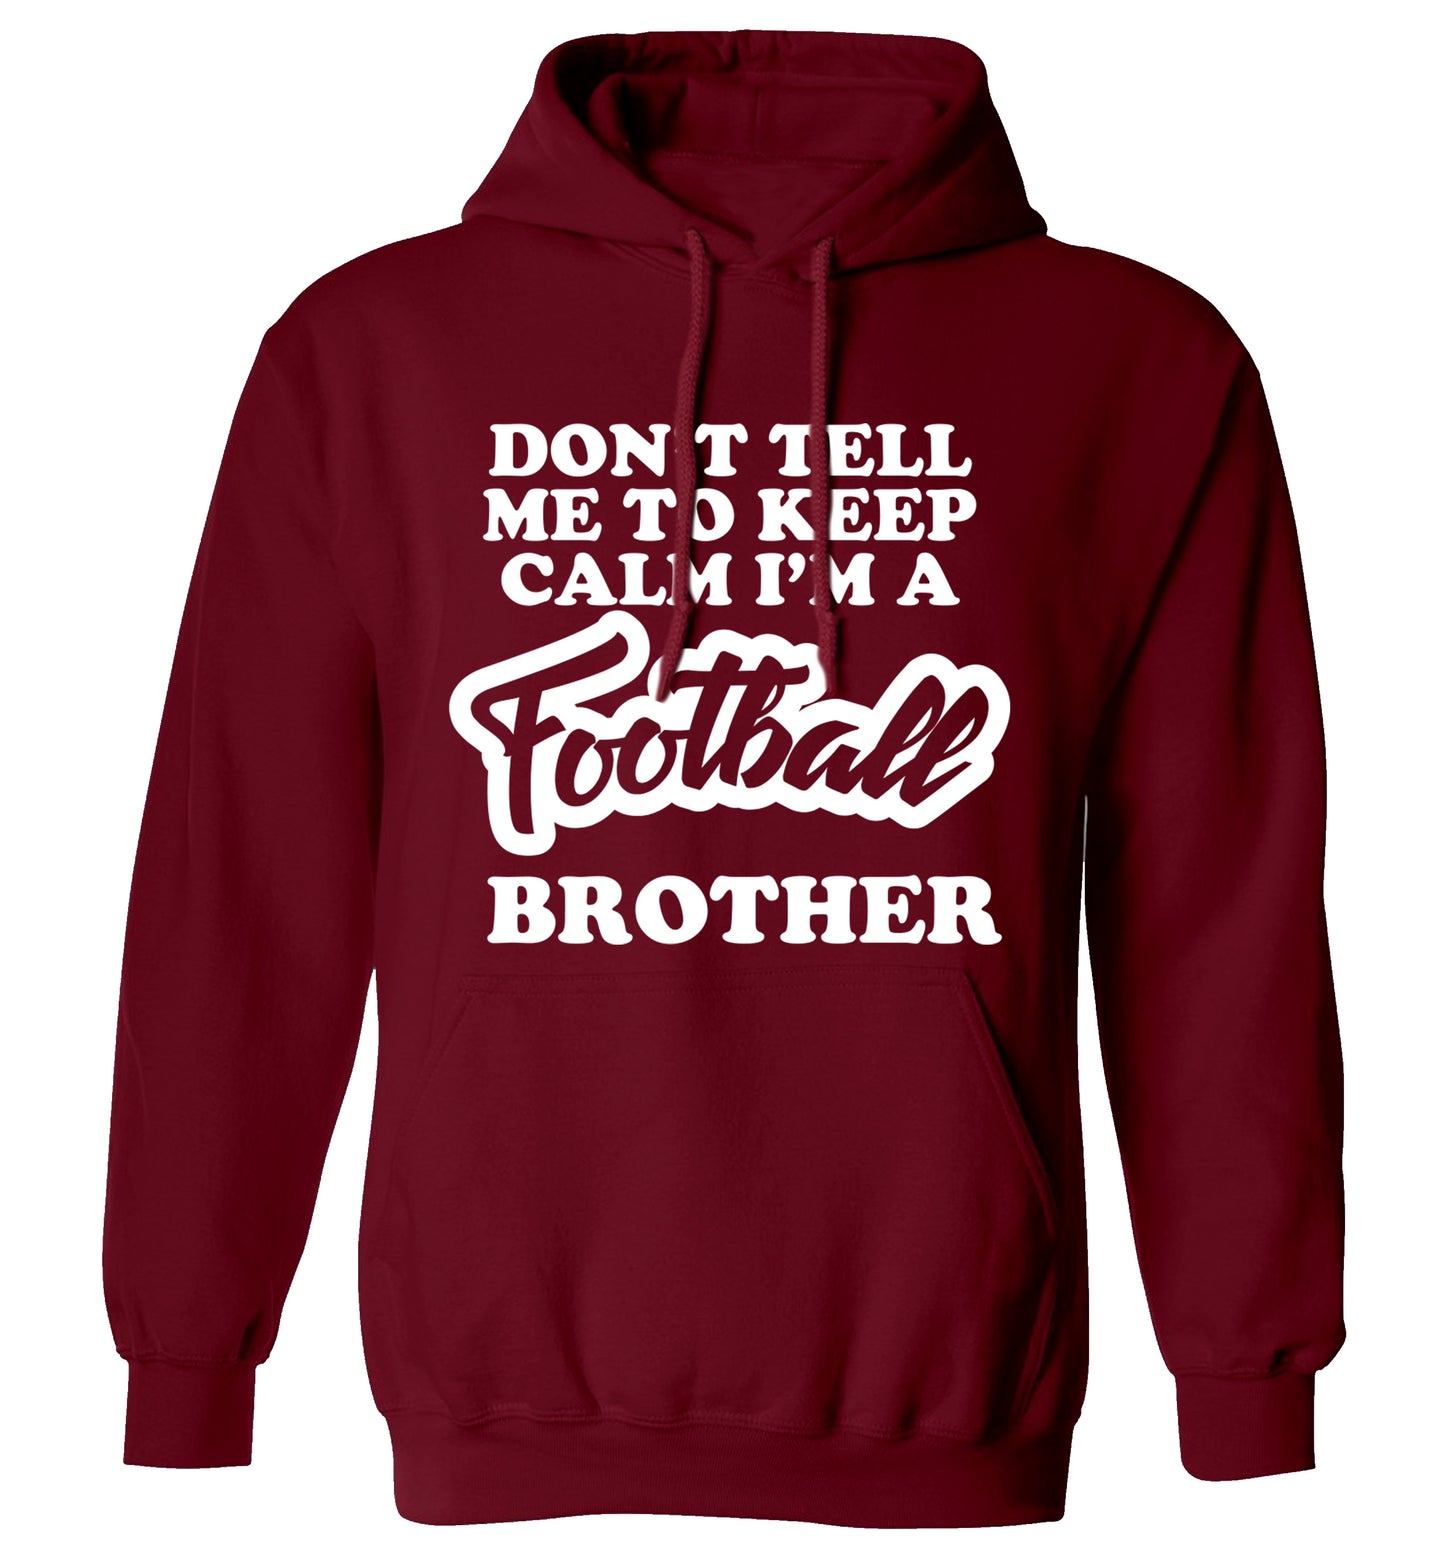 Don't tell me to keep calm I'm a football brother adults unisexmaroon hoodie 2XL